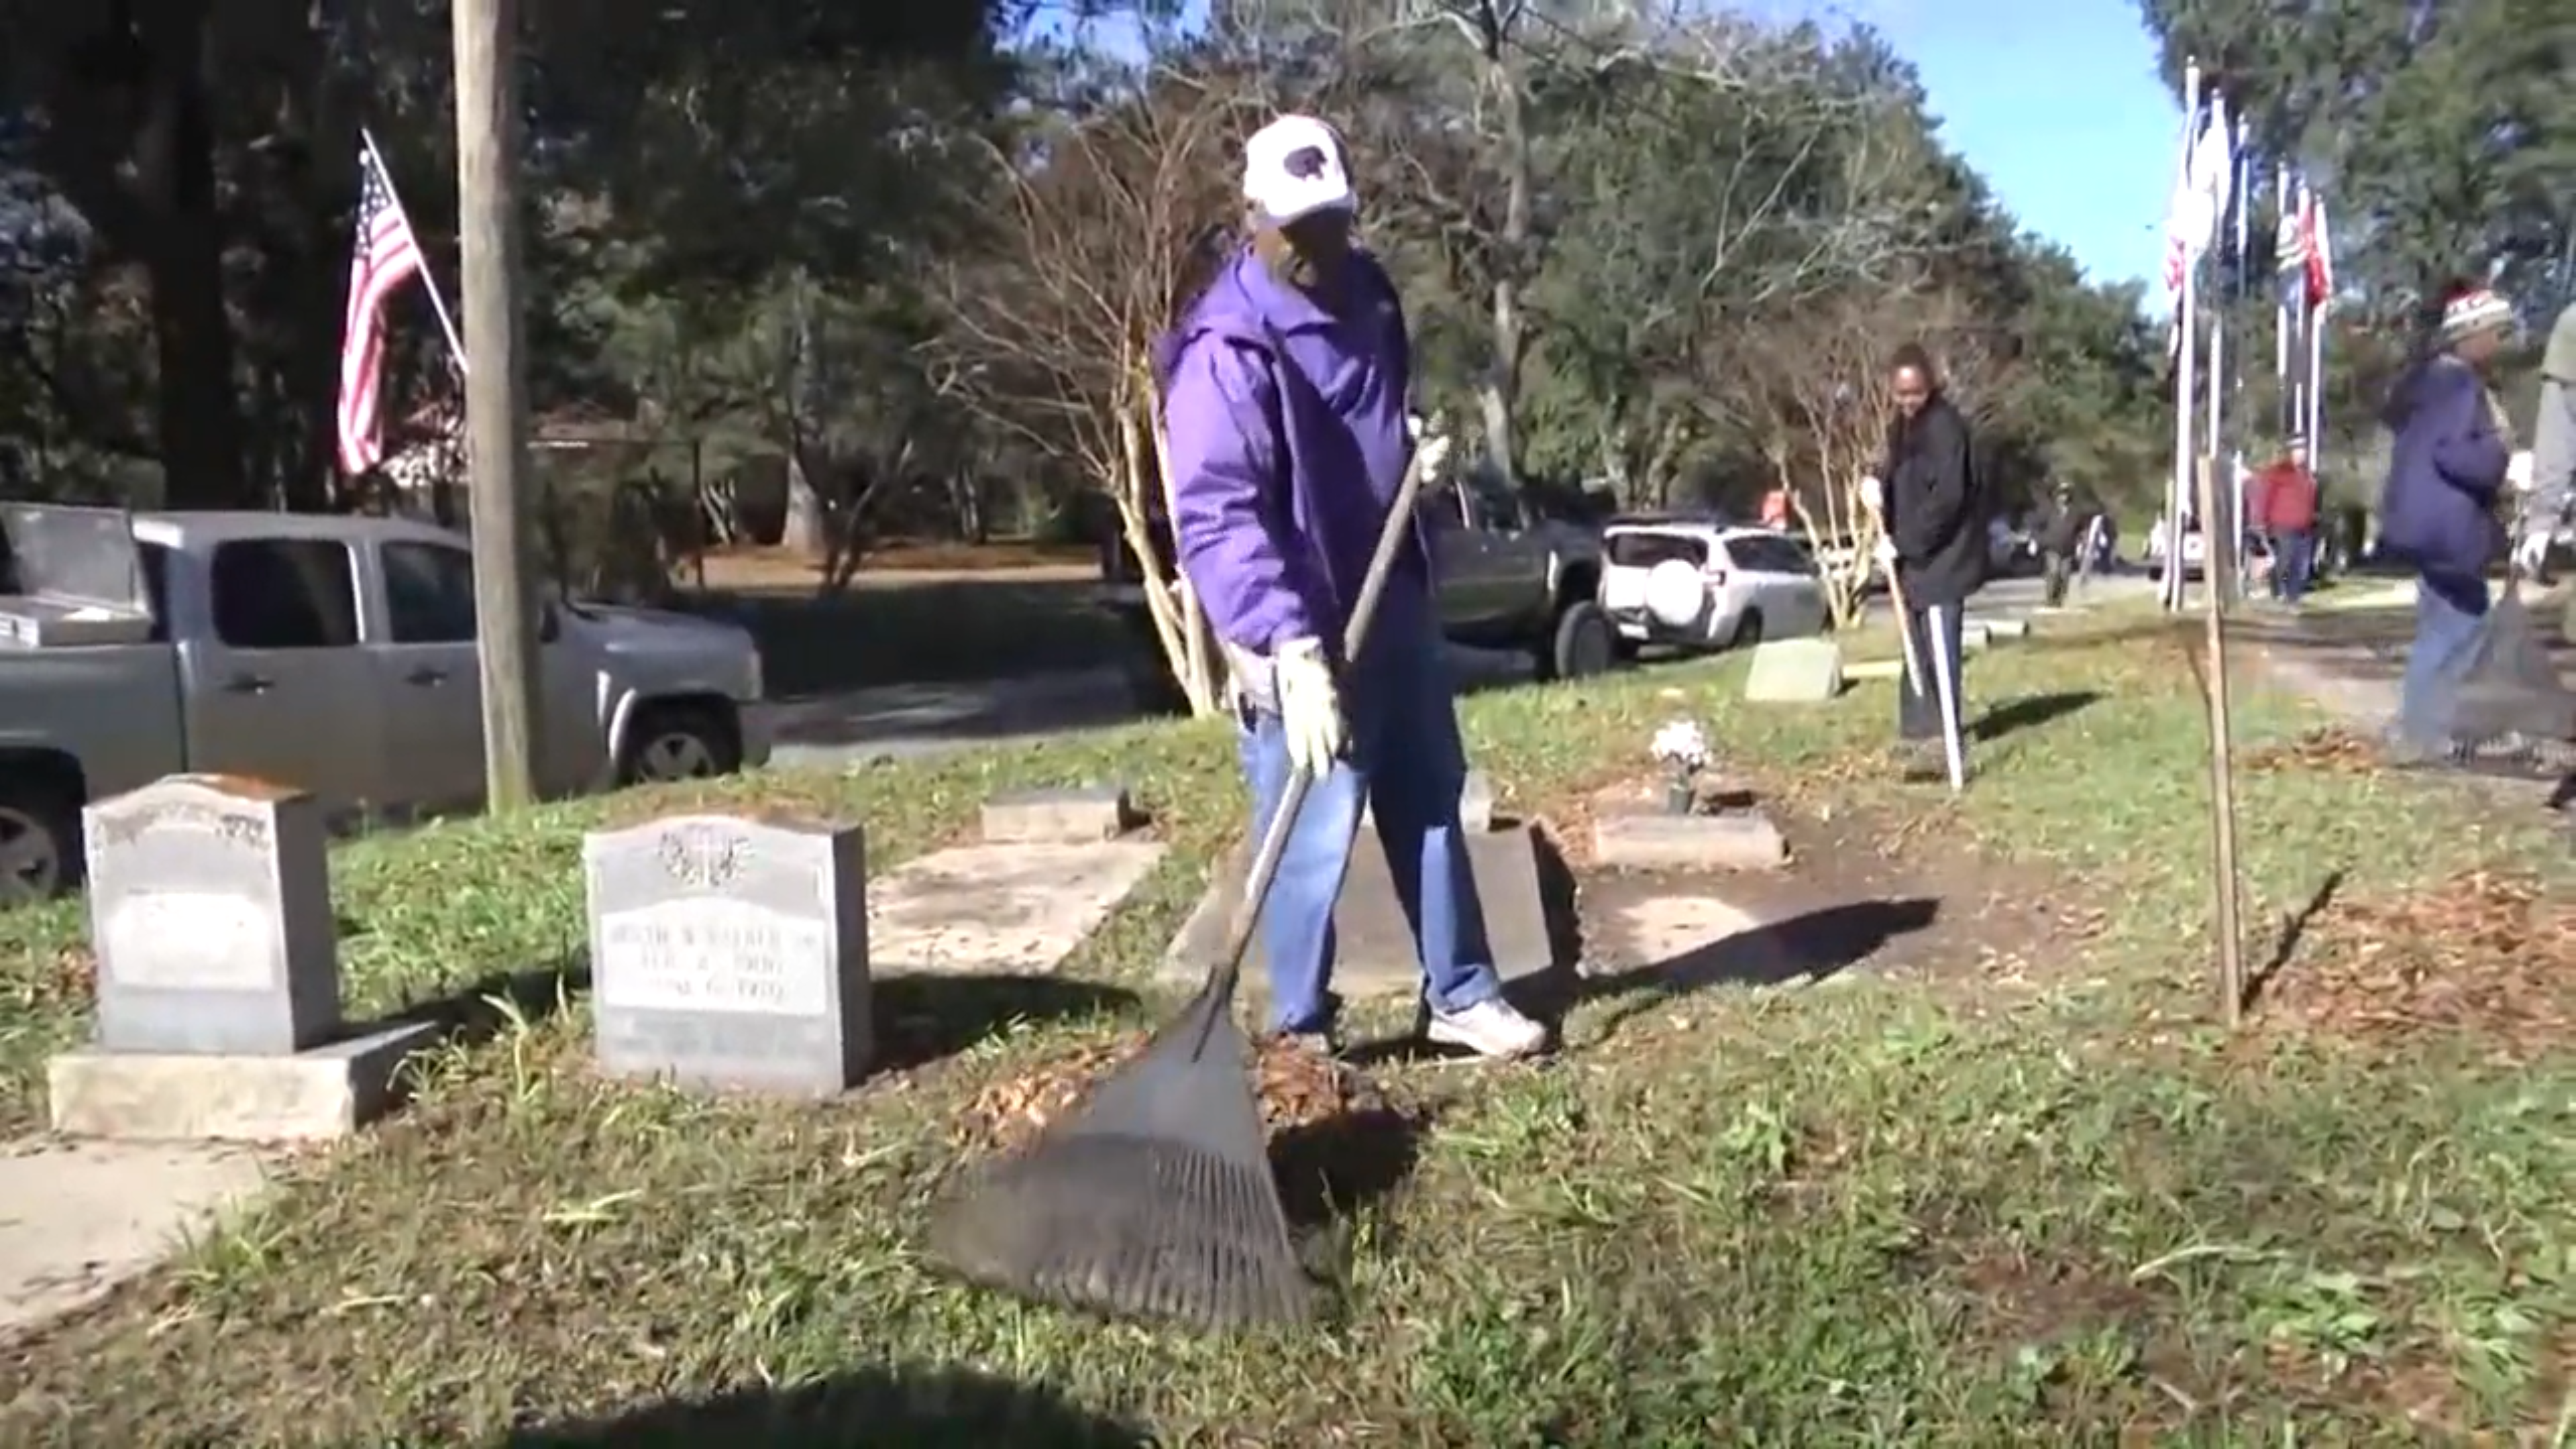 Veterans work to revitalize cemetery “in peril” as clean-up efforts falter during covid